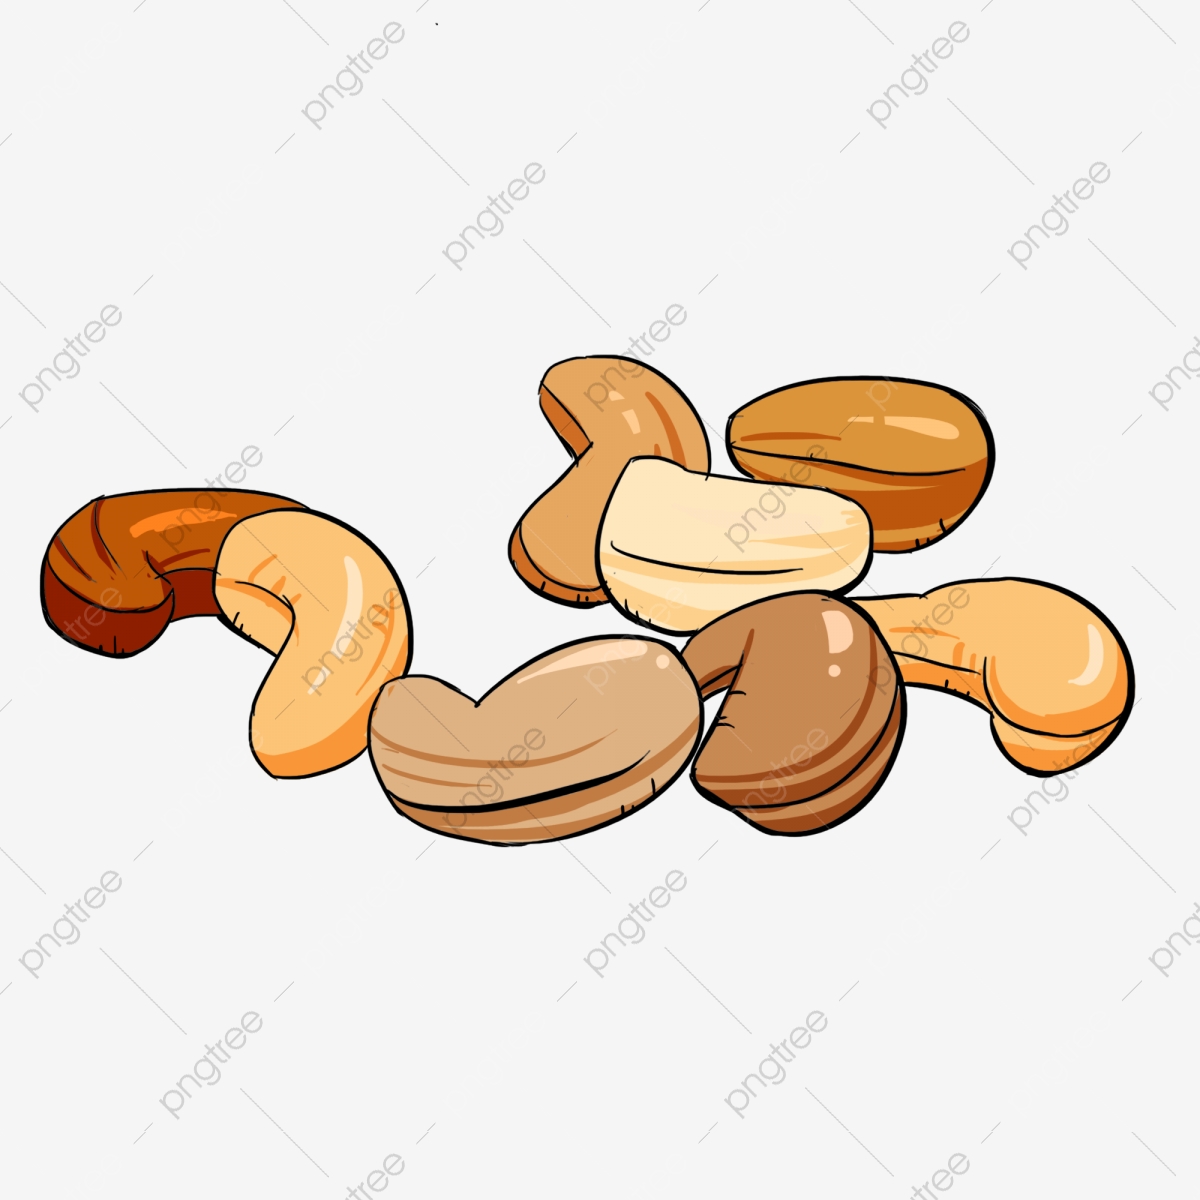 Meaning nuts Nomenclature of